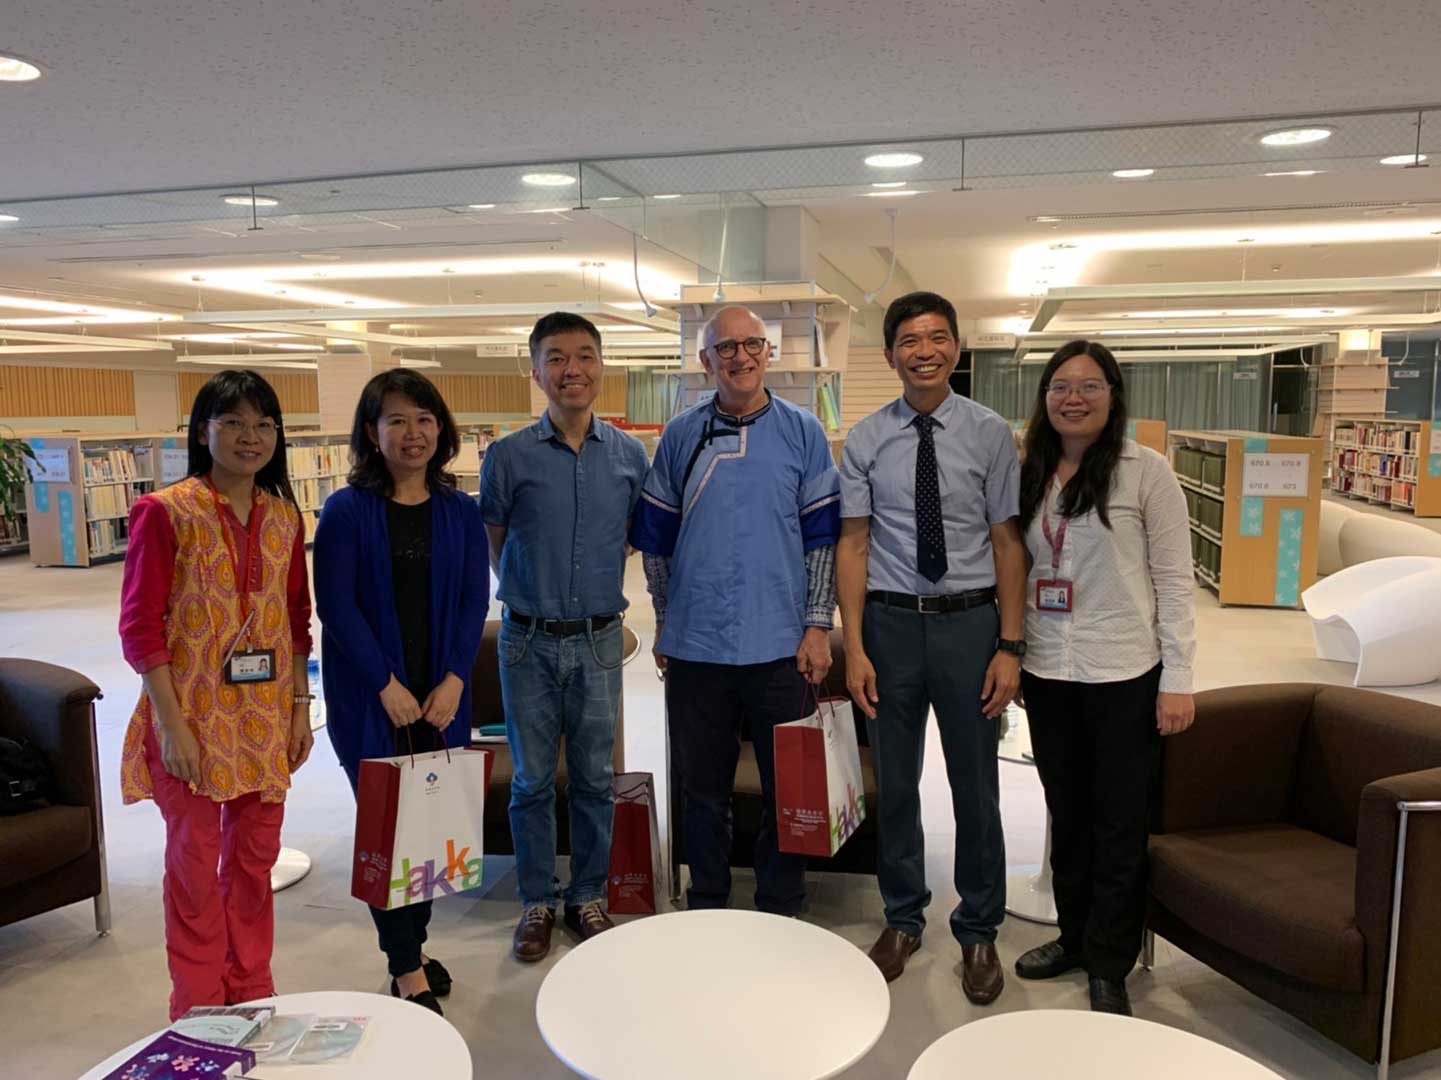 Accompanied by Hsin-Wen Hsu, Assistant Professor of National Taiwan Normal University, and Professor Shih-Hsin Huang, the vocalist, Dr. Anthony Seeger visited the Taiwan Hakka Museum, sharing this related experiences  in cultural assets, folk music and museum archives.